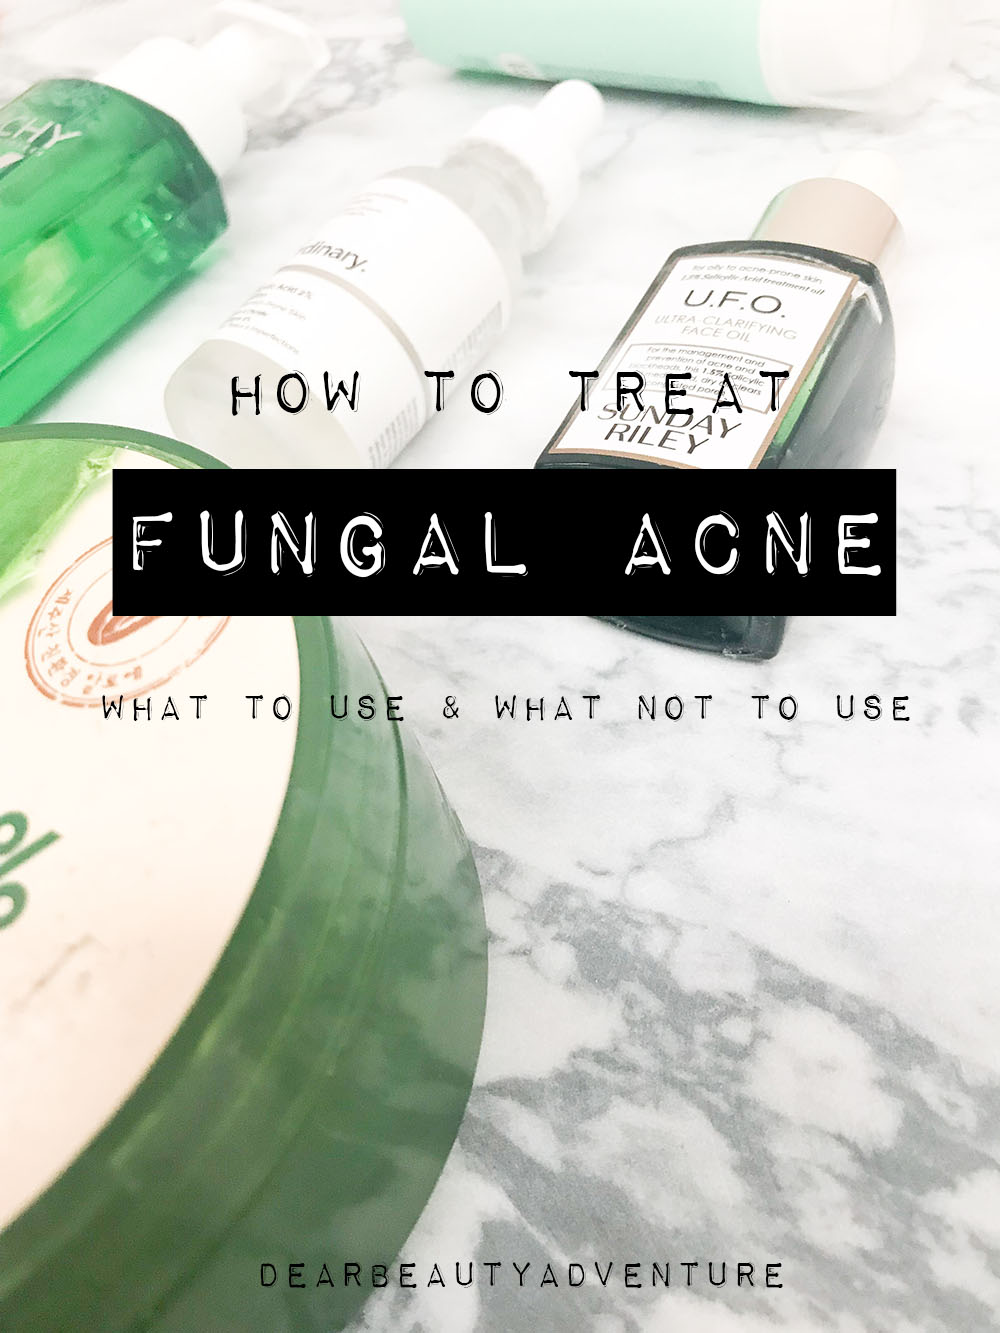 How To Get Rid Of Whiteheads Or Do You Have Fungal Acne Update Dear Beauty Adventure 